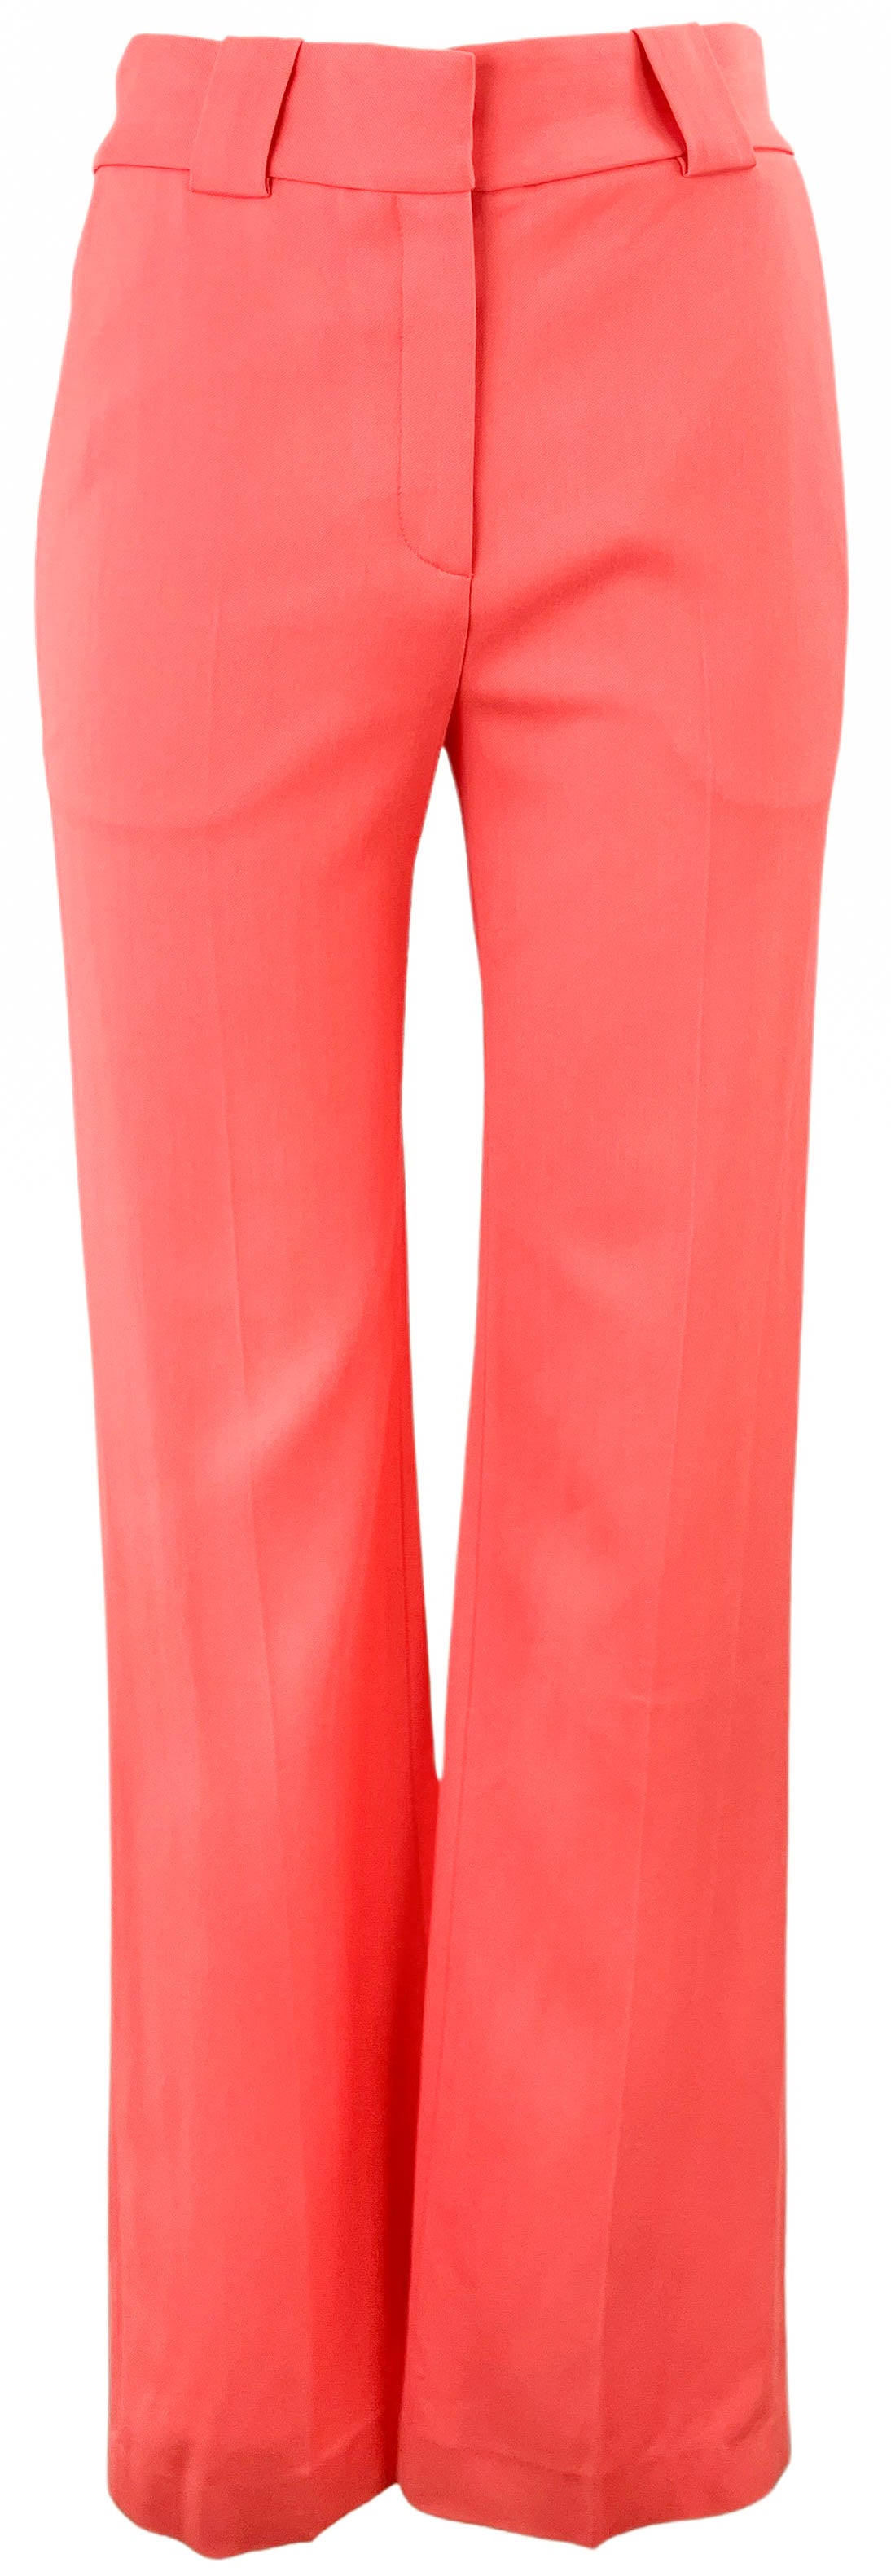 A.L.C. Trousers in Bright Coral - Discounts on A.L.C. at UAL